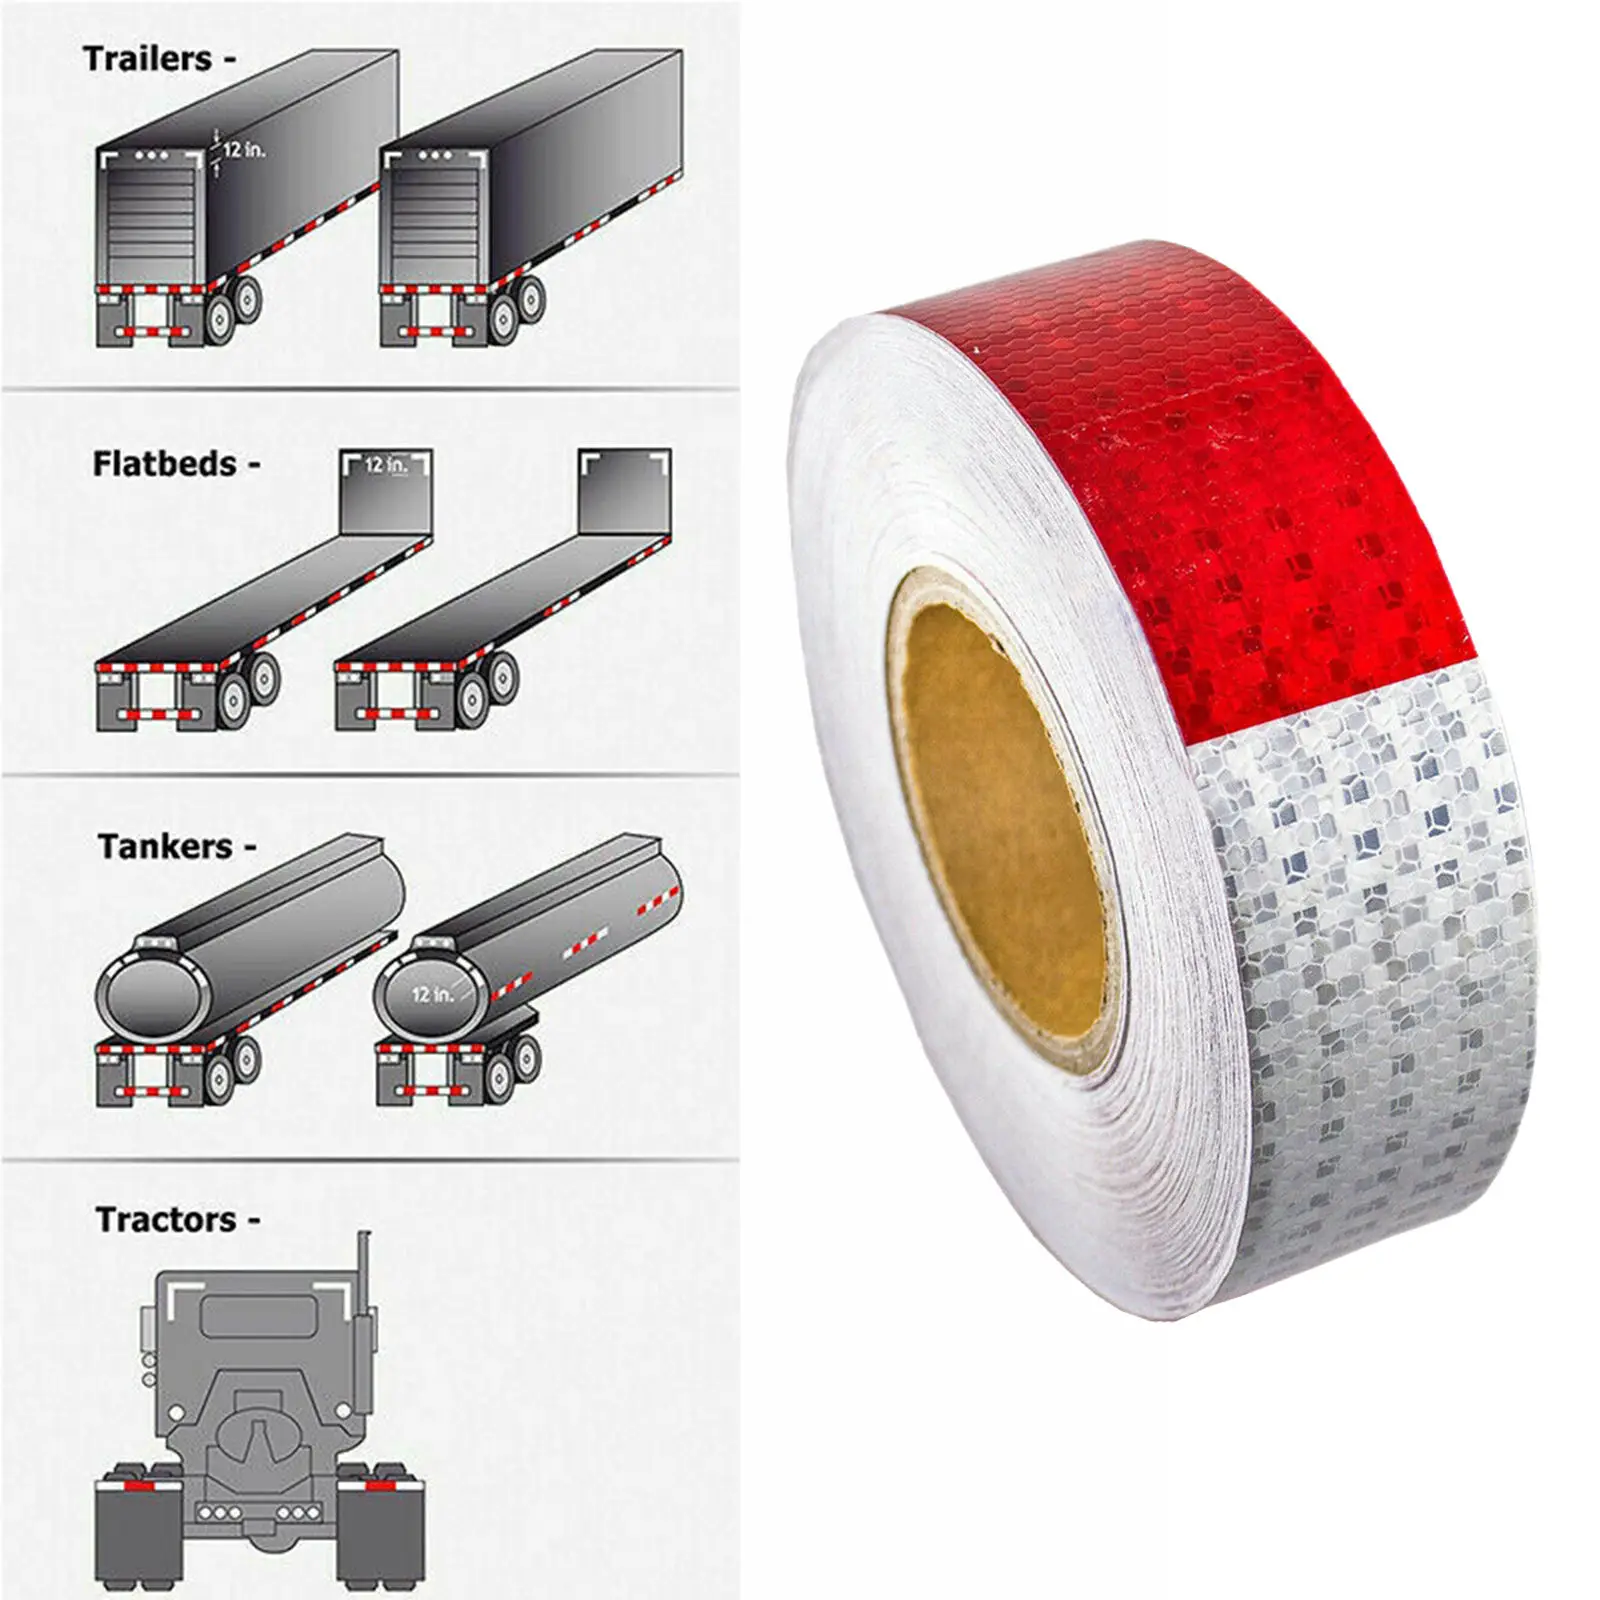 High-Intensity Reflective Red and White Self-Adhesive Conspicuity Tape 2 Inch by 150 Foot Roll